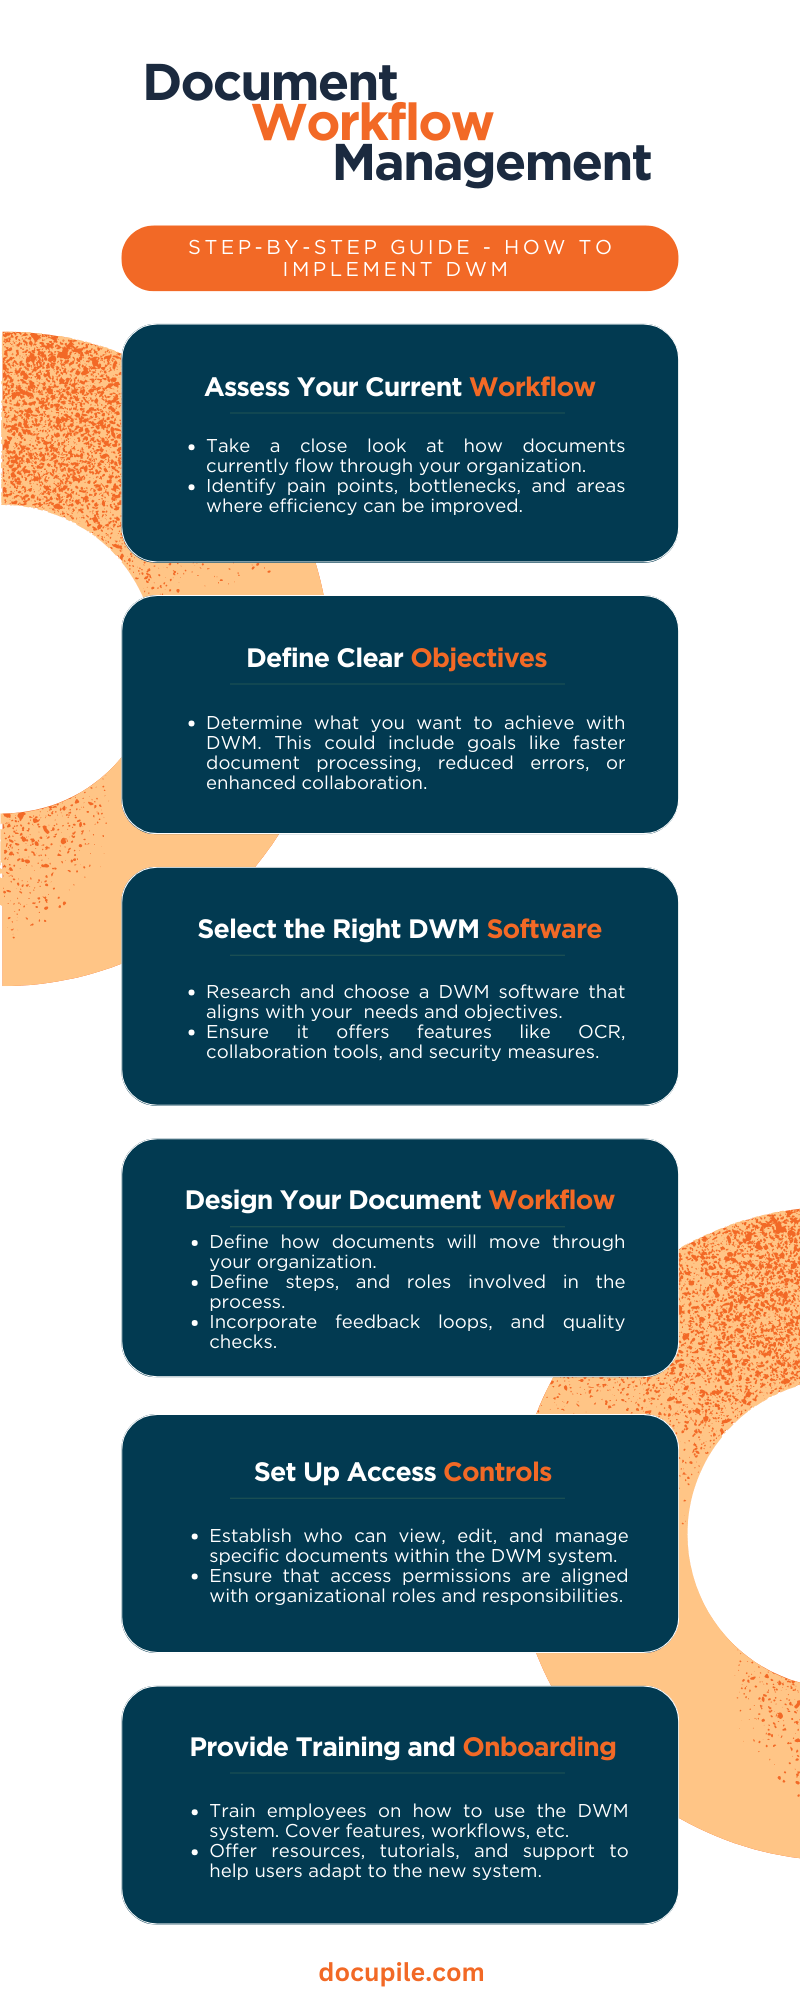 Document-Workflow-Management-Infographic-Image.png